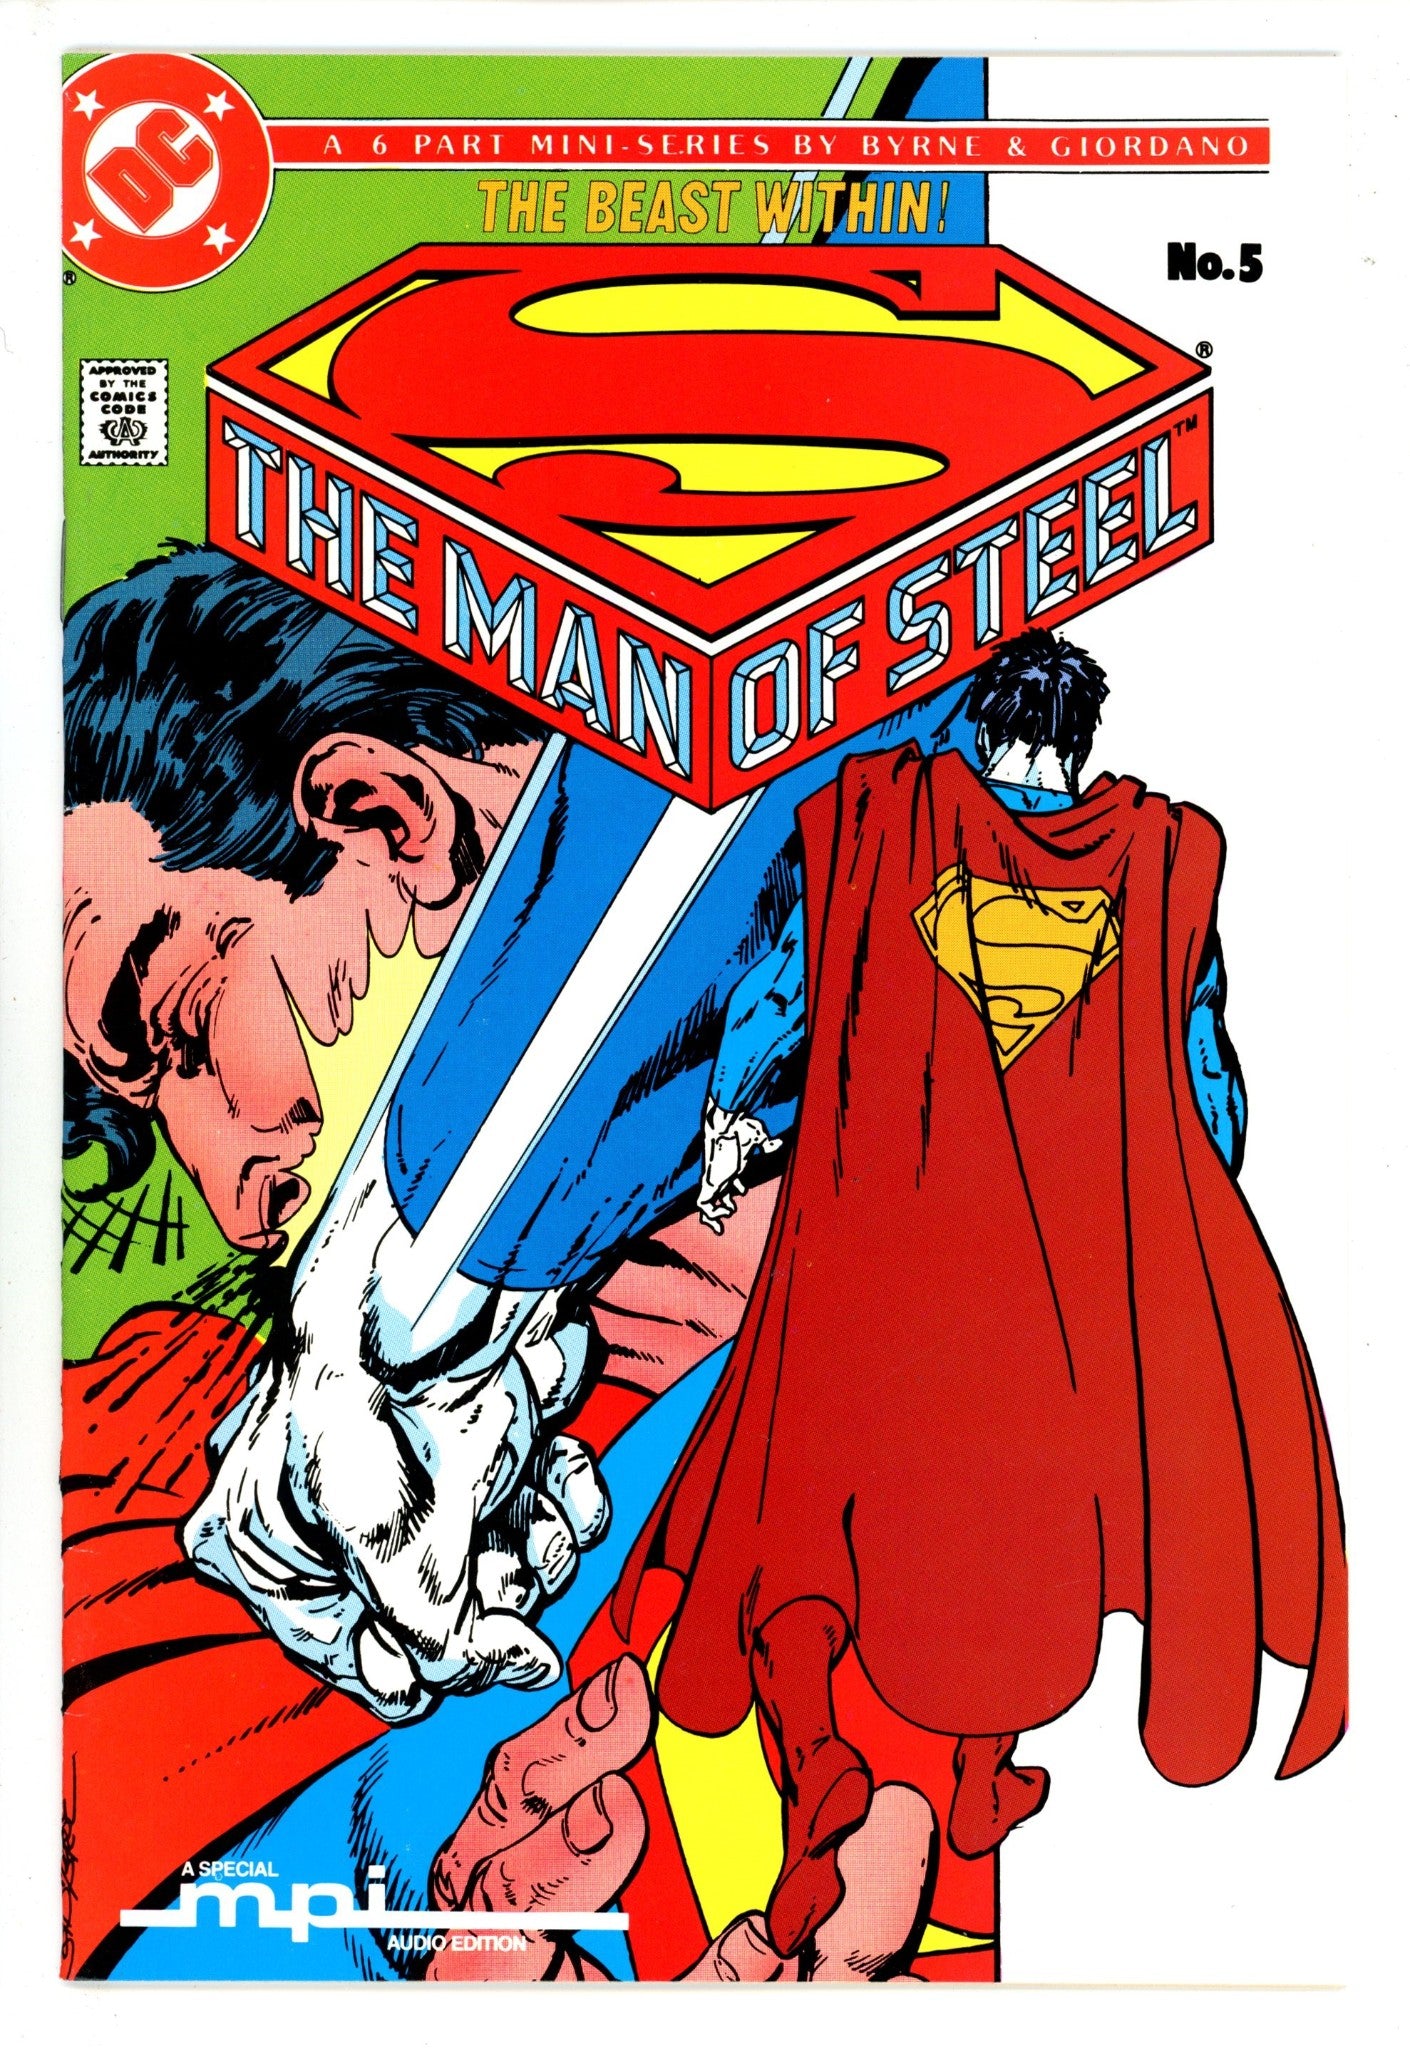 The Man of Steel Vol 1 5 MPI Audio Variant FN (1986)